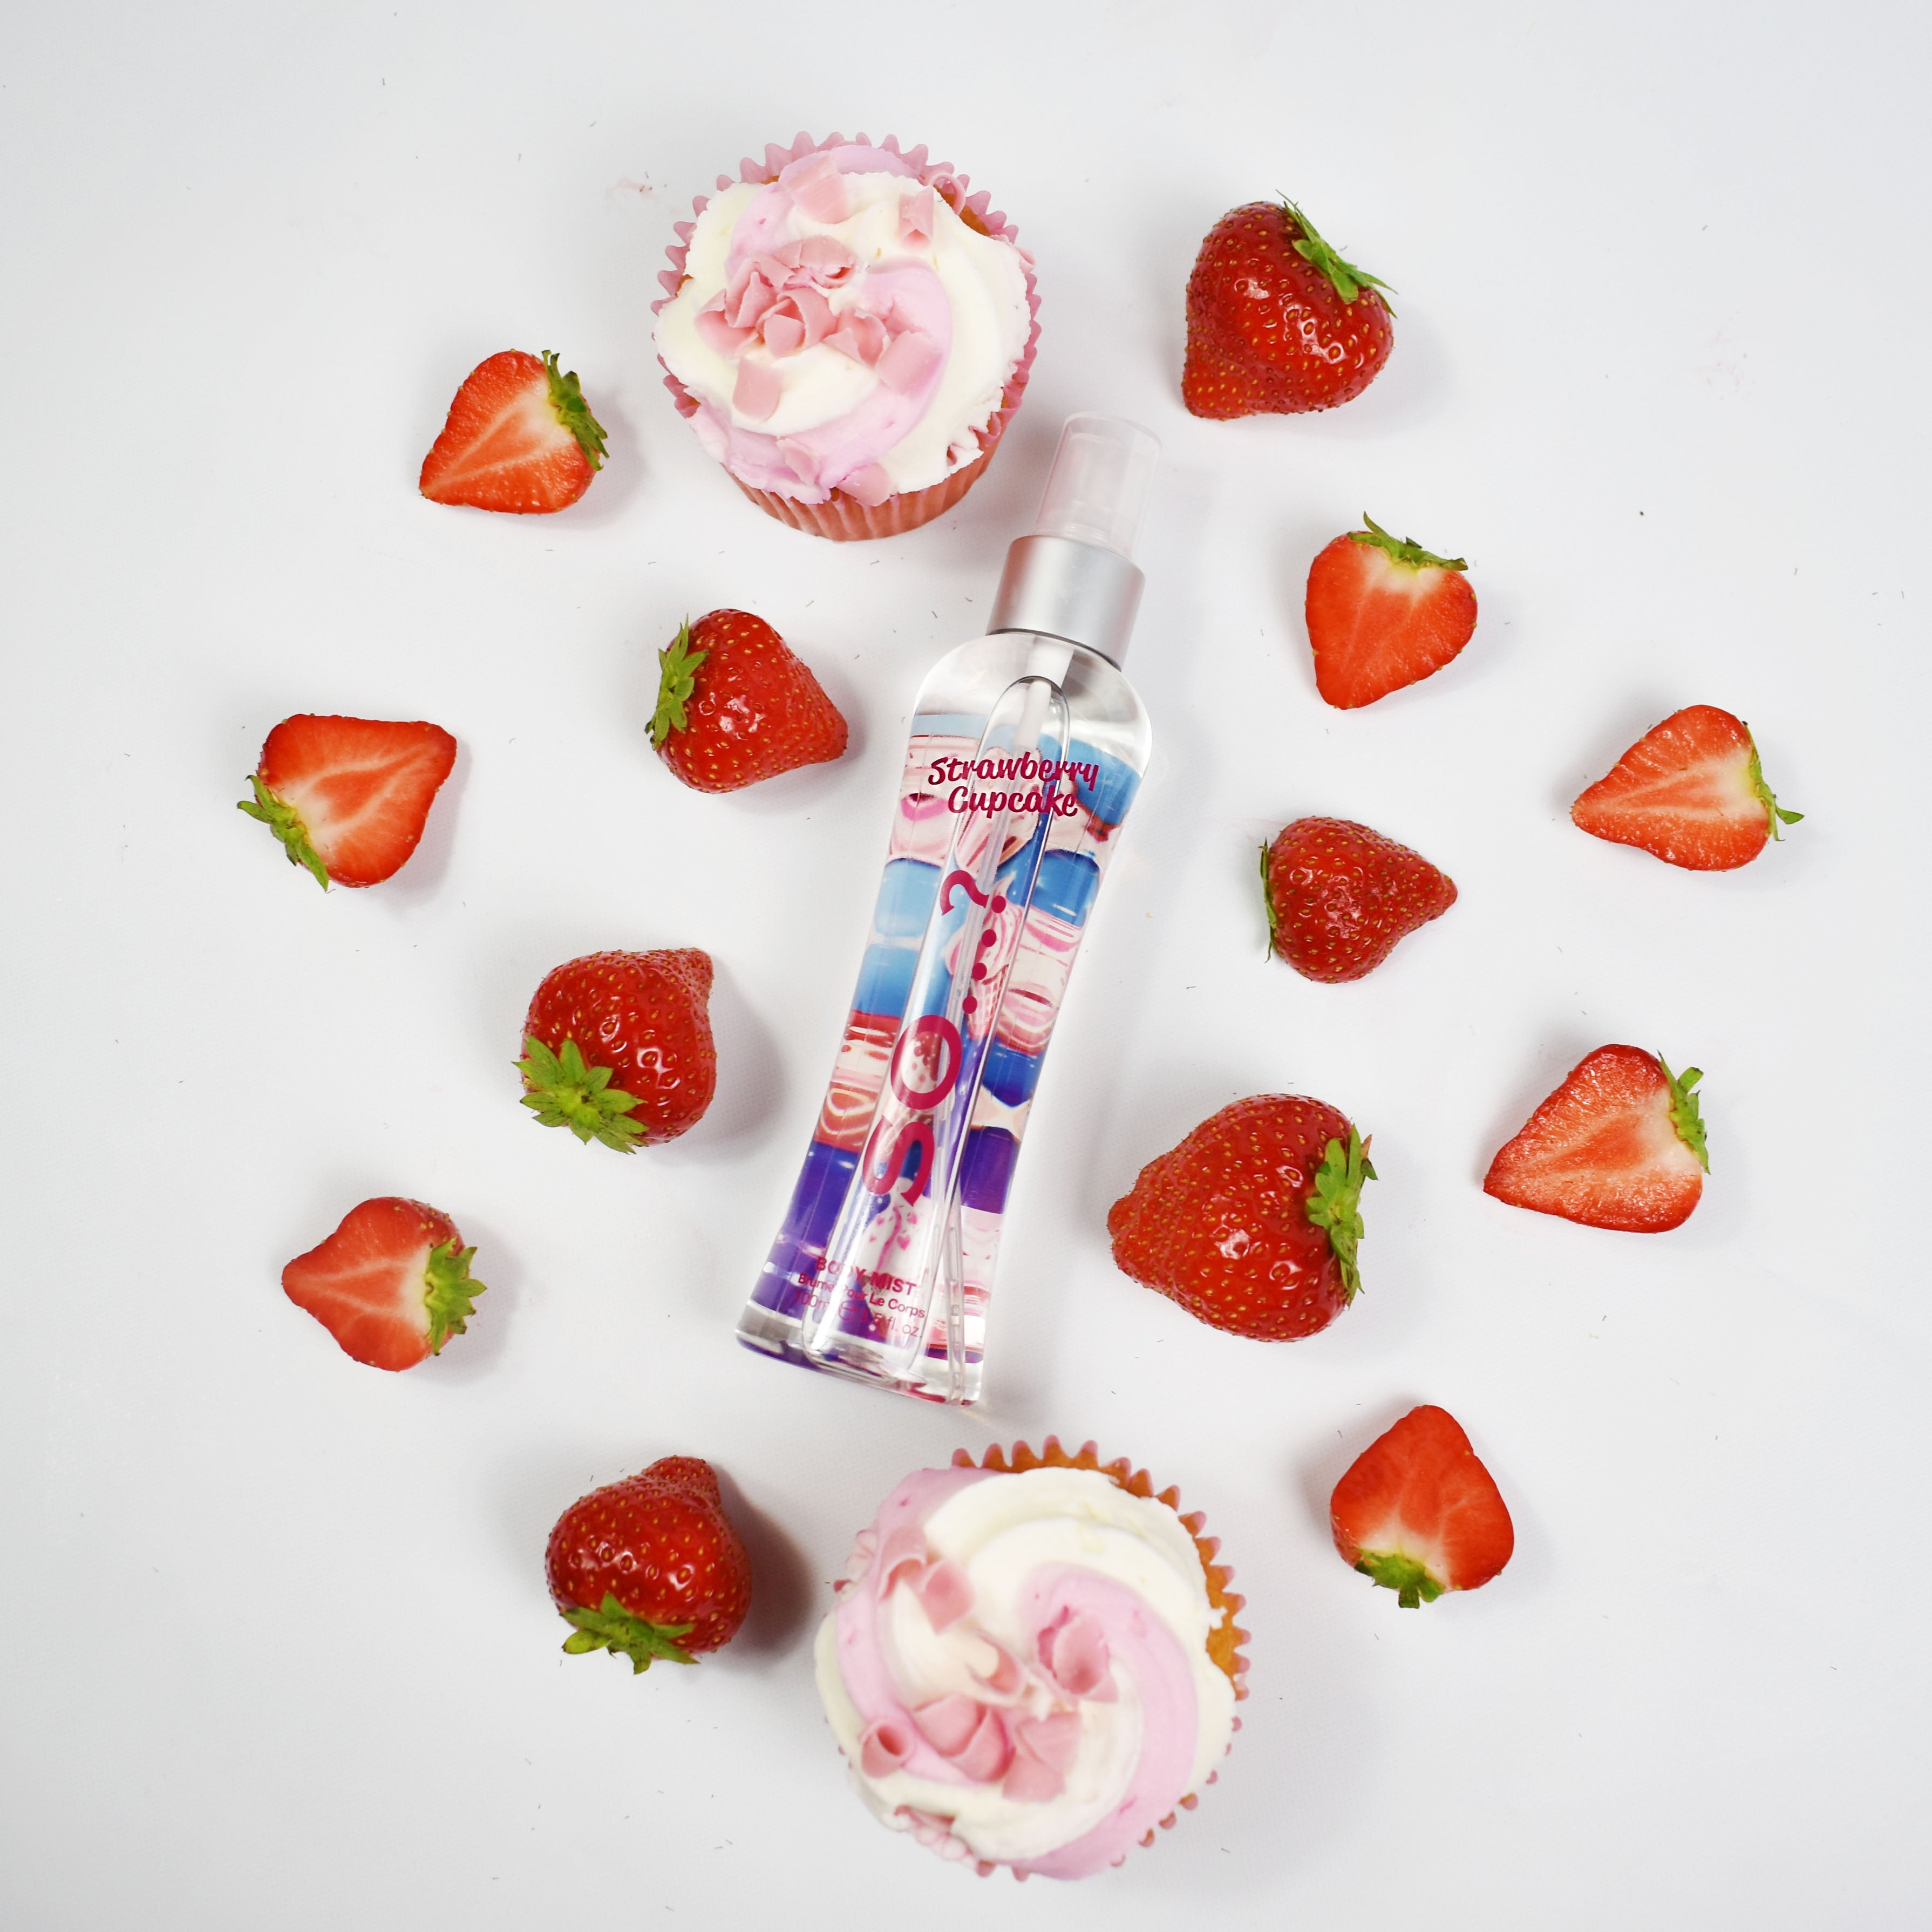  Buy Patisserie de Bain Strawberry Cupcake Body Mist Spray online  in India on Foxy. Free shipping, watch expert reviews.